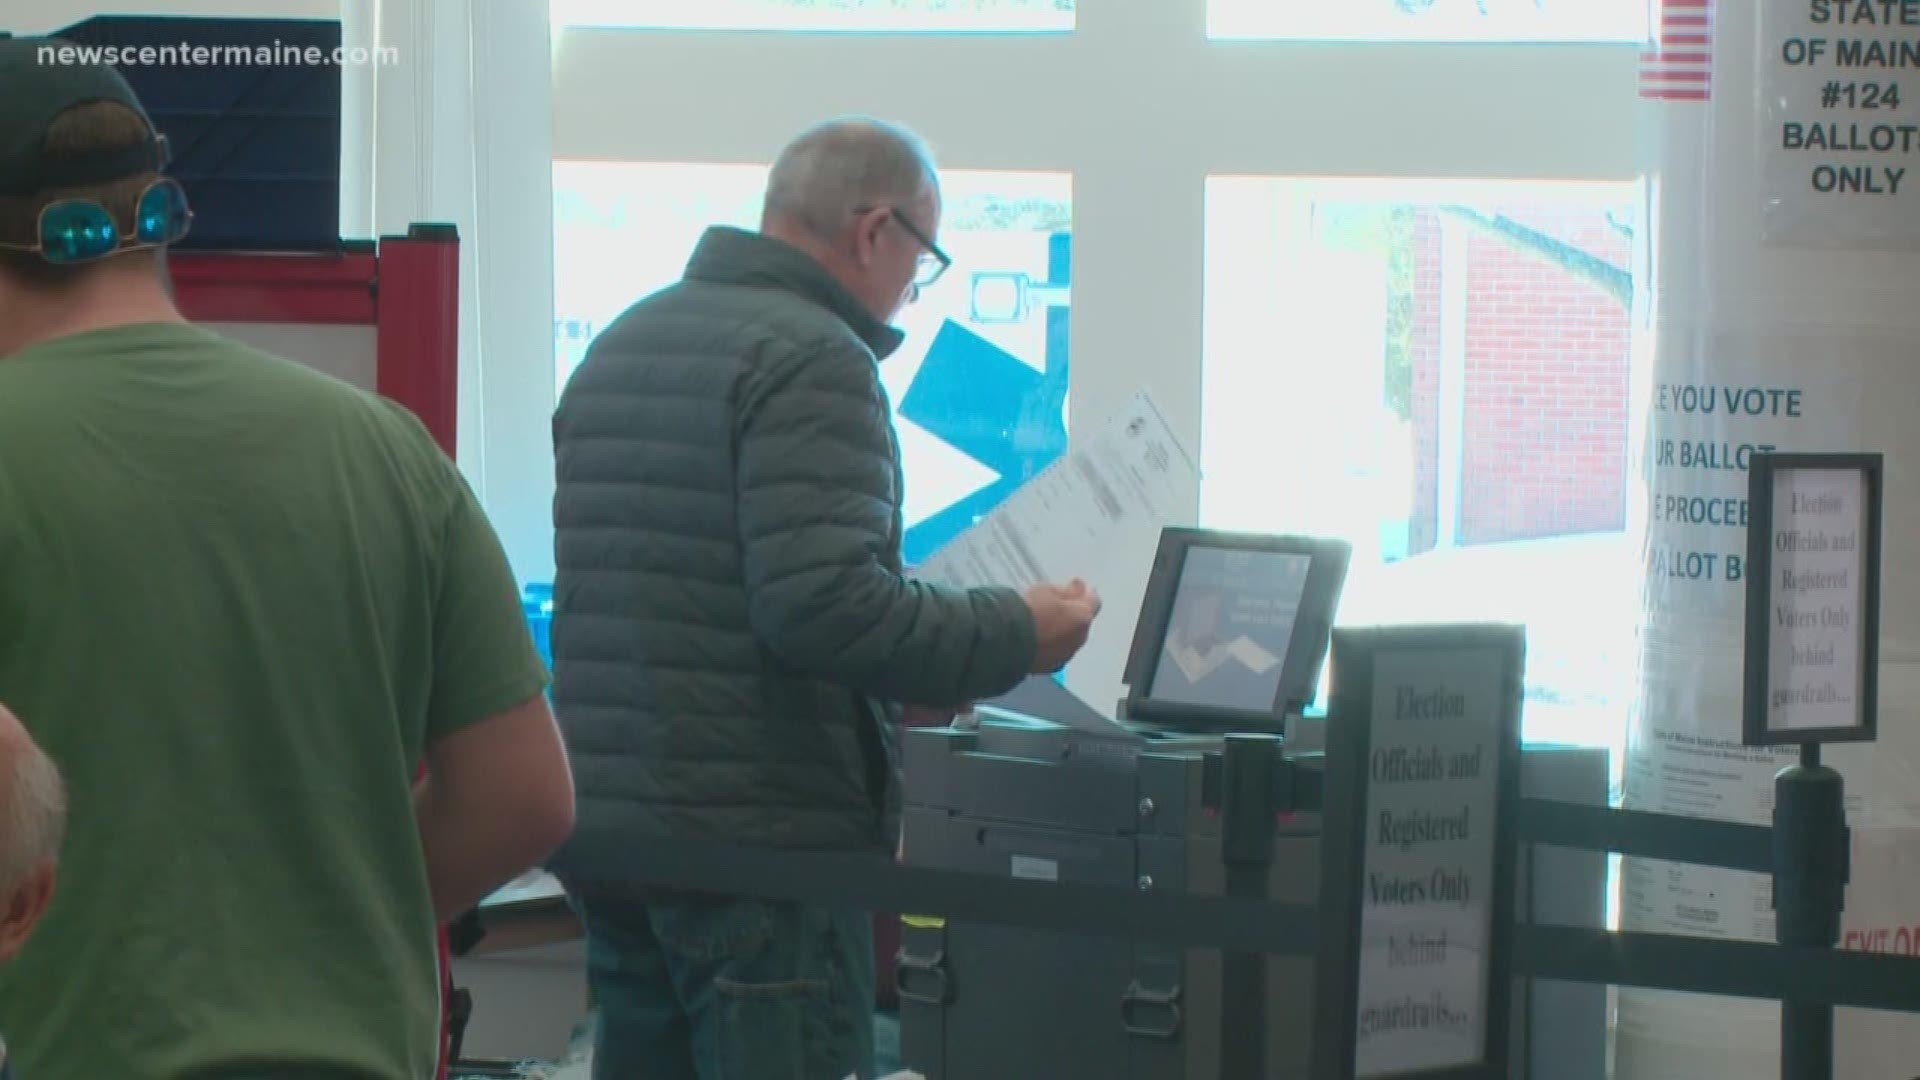 Voters from Bangor and Orono turned out for the special election in District 124 Tuesday.